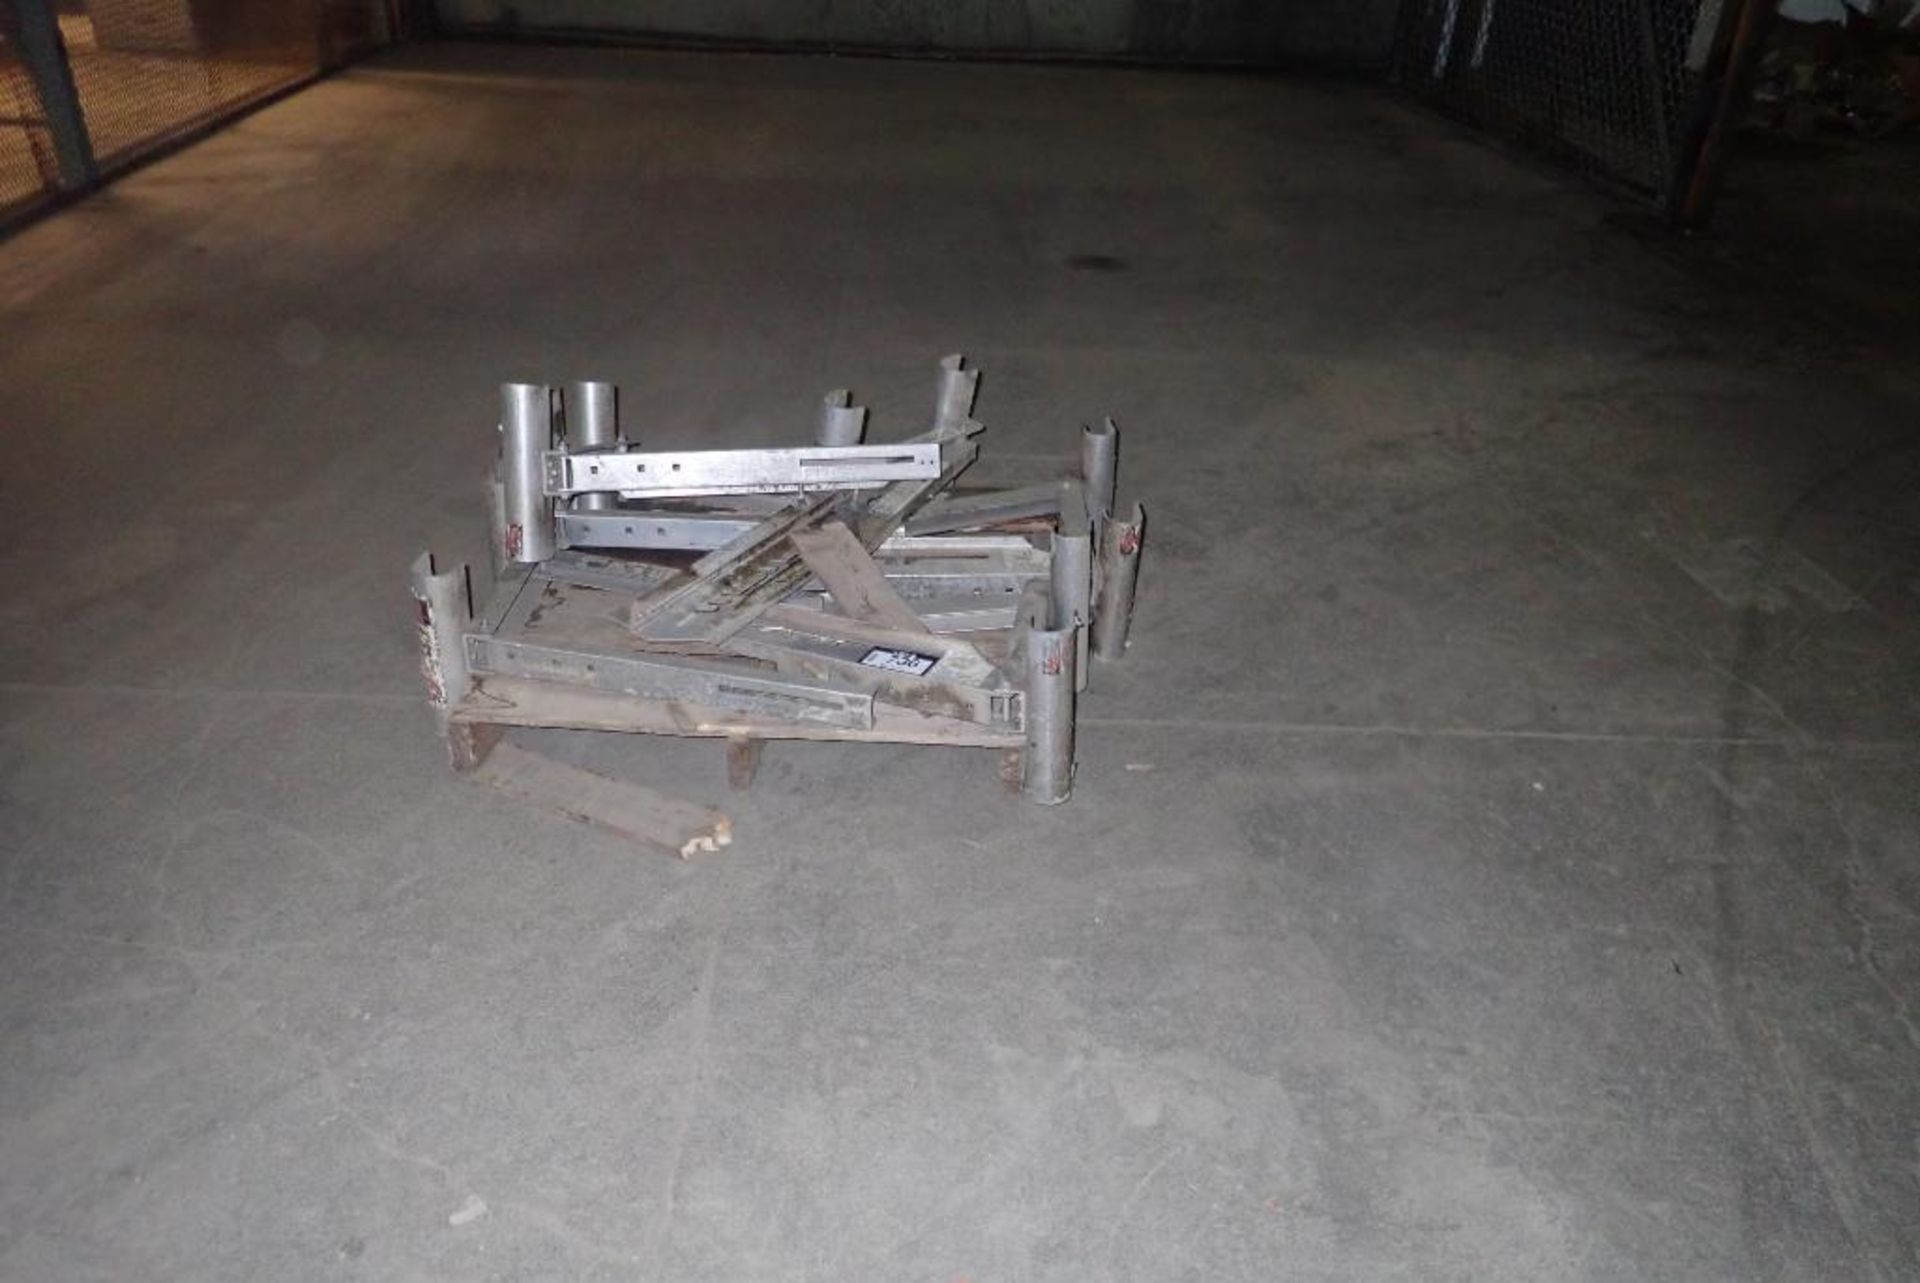 Lot of (5) Approx. 2'x16' Scaffolding Walkways and Pallet of Platform Clamps. - Image 3 of 3